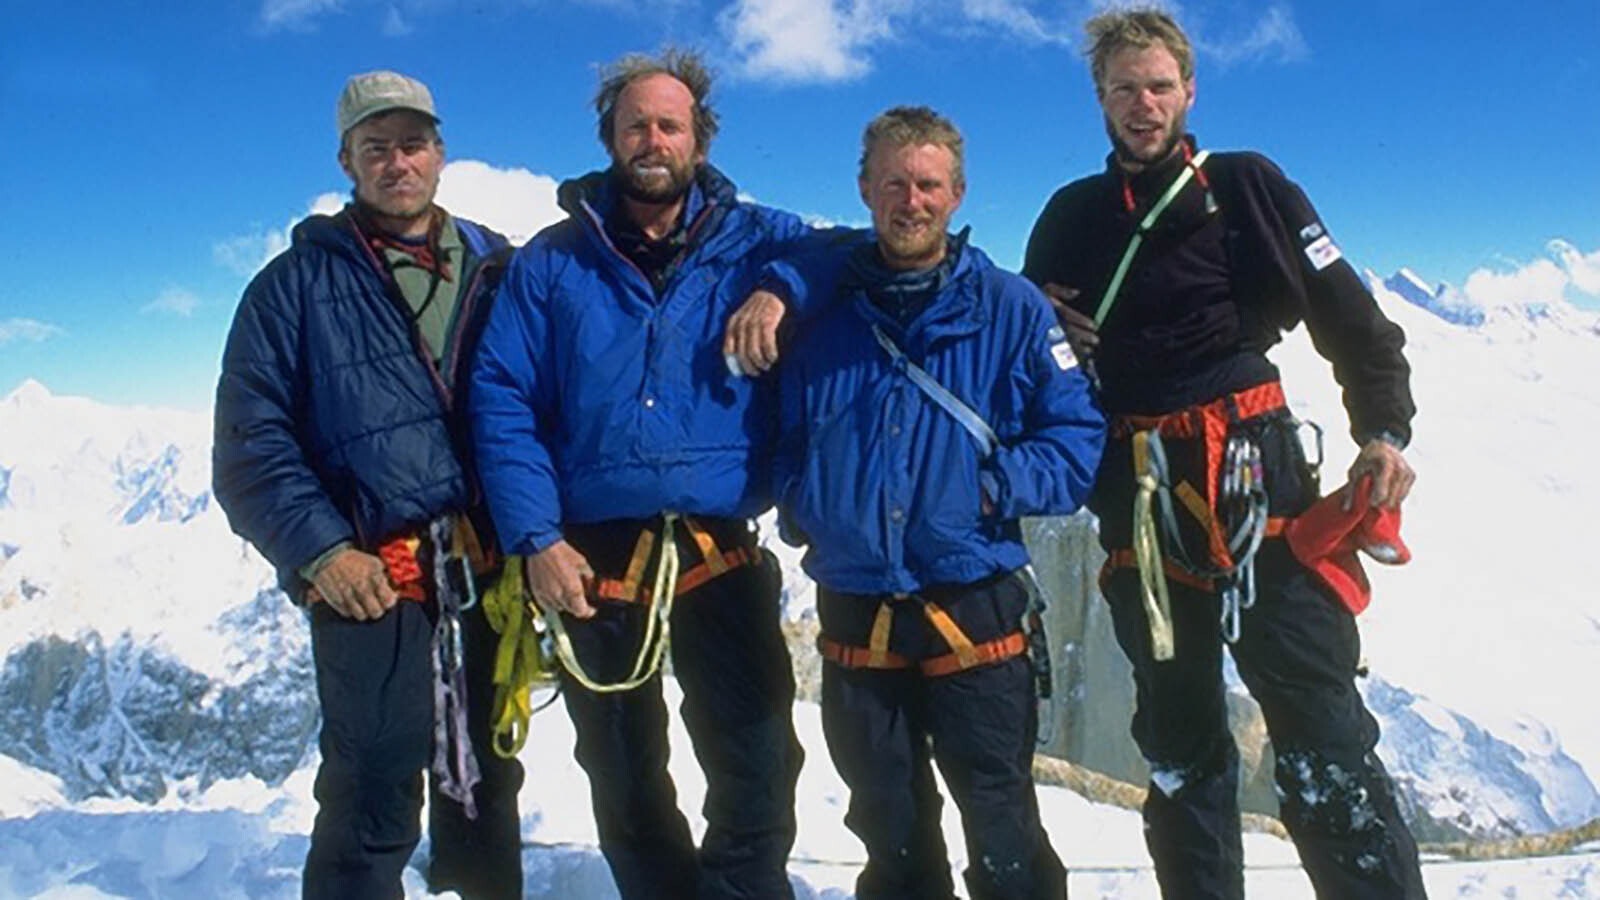 It was Sept. 7, 1995, when a ragtag underdog group of climbers from Wyoming pioneered the now-famous Cowboy Direct route up Trango Towers in the Himalaya. They are, in no particular order, Todd Skinner, Mike Lilygren, Bobby Model and Jeff Bechtel.